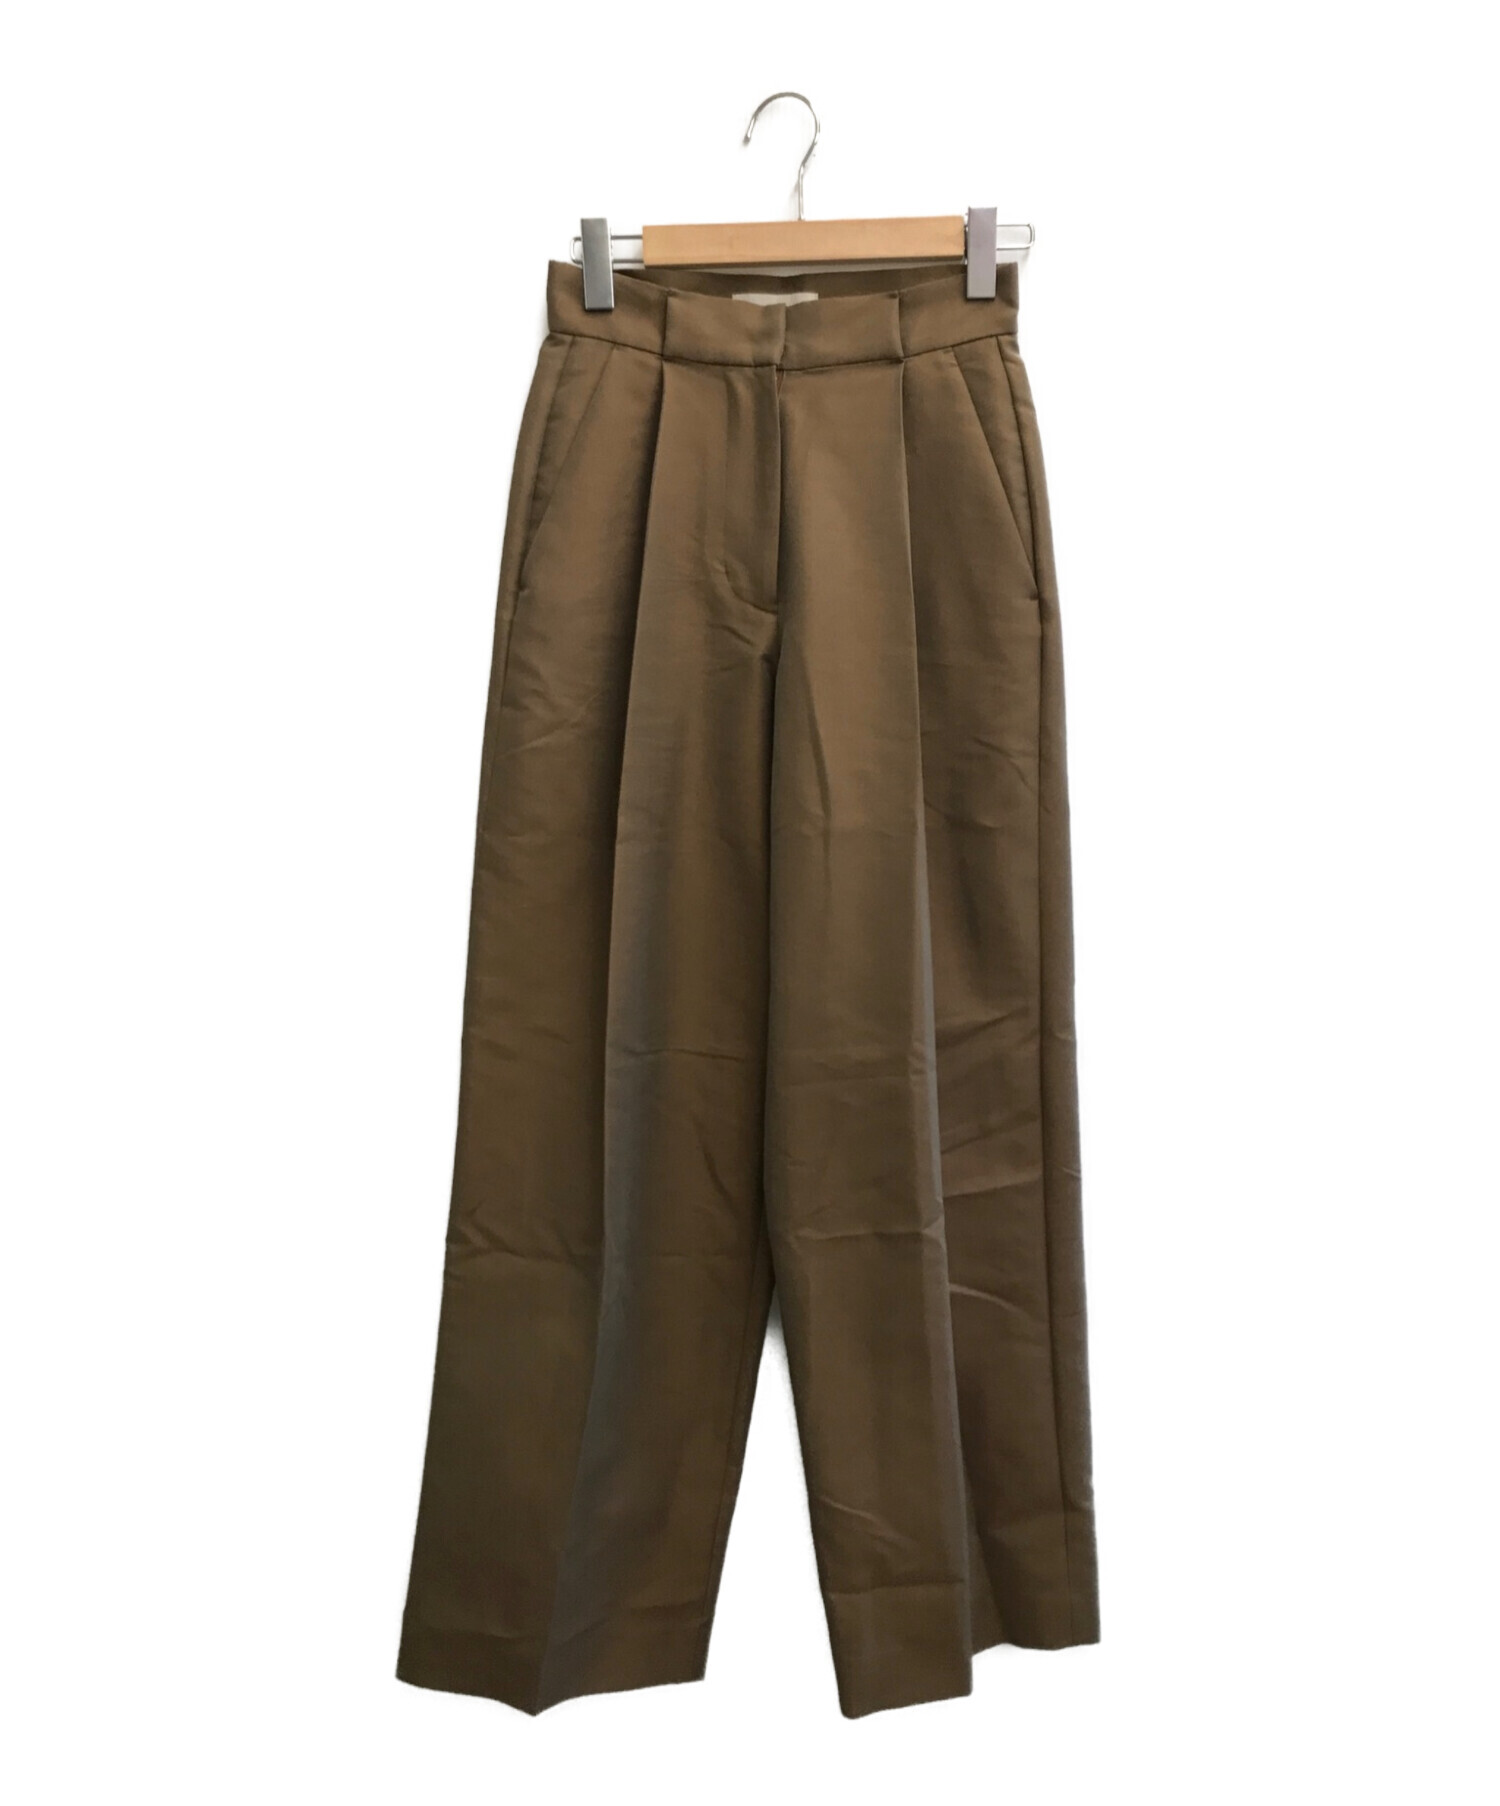 TODAYFUL Chambray Twill Trousers